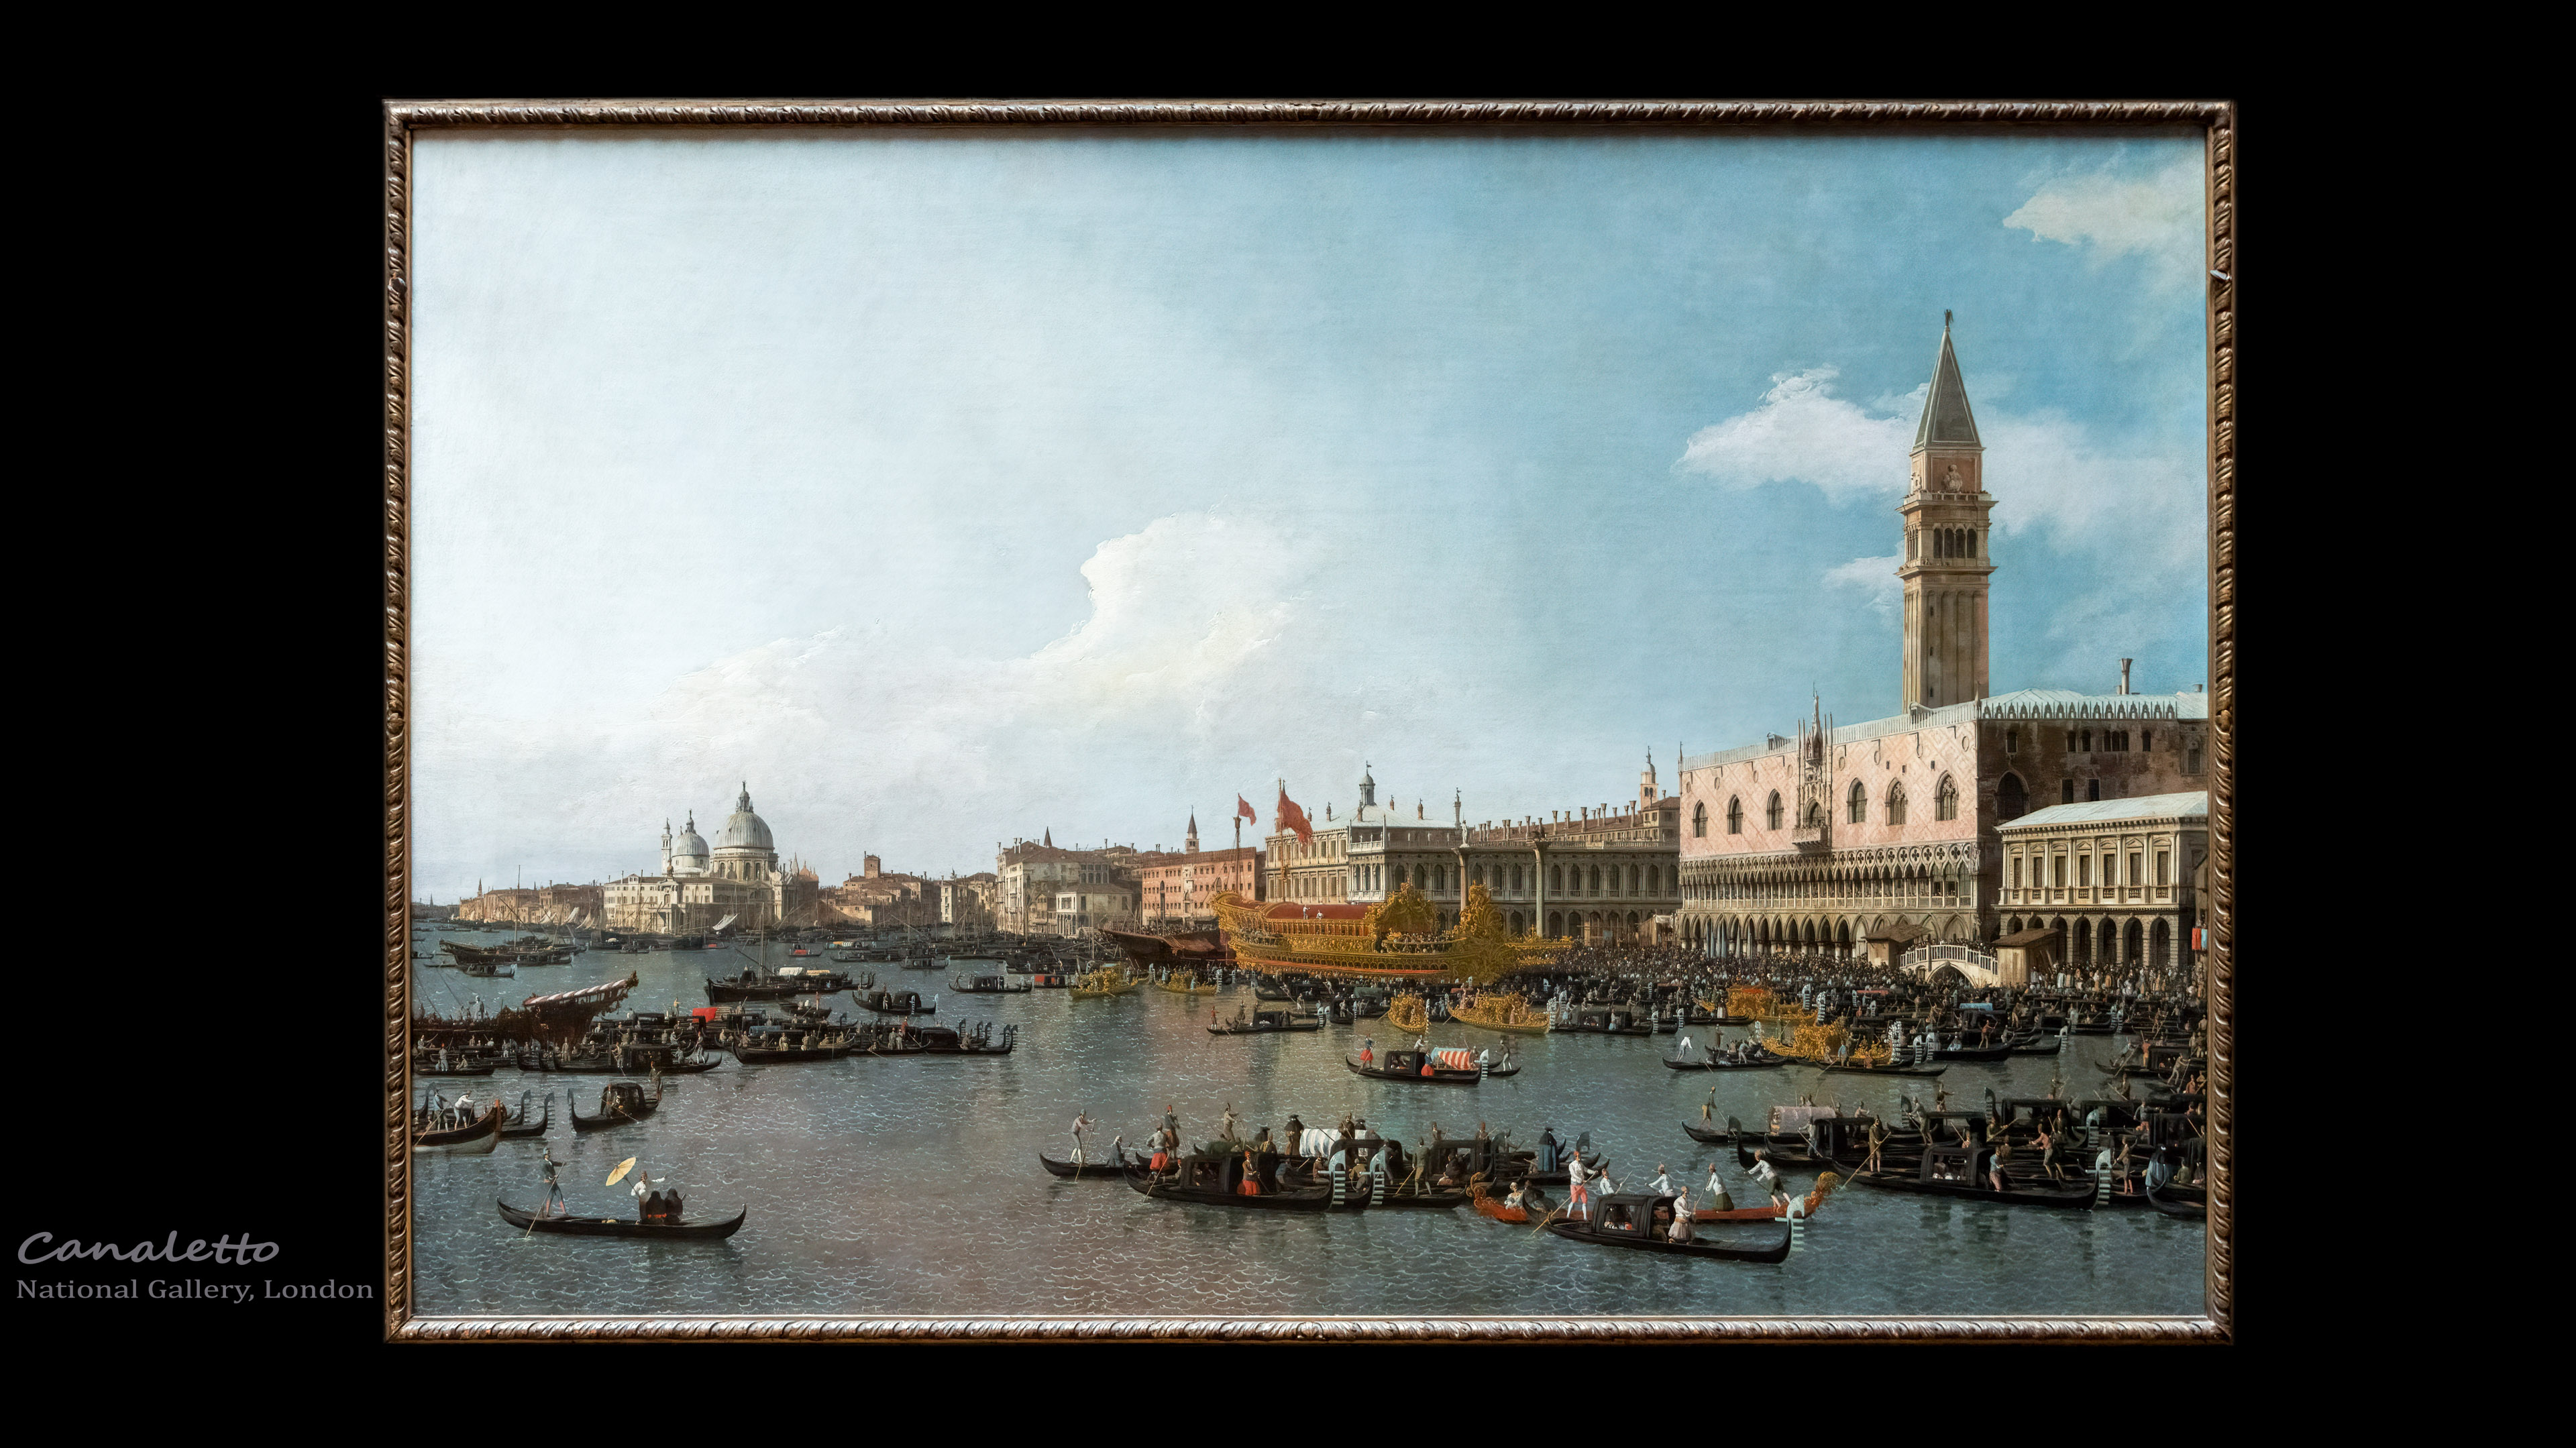 Transport yourself to the picturesque landscapes of Canaletto painting through our 4K desktop wallpapers.